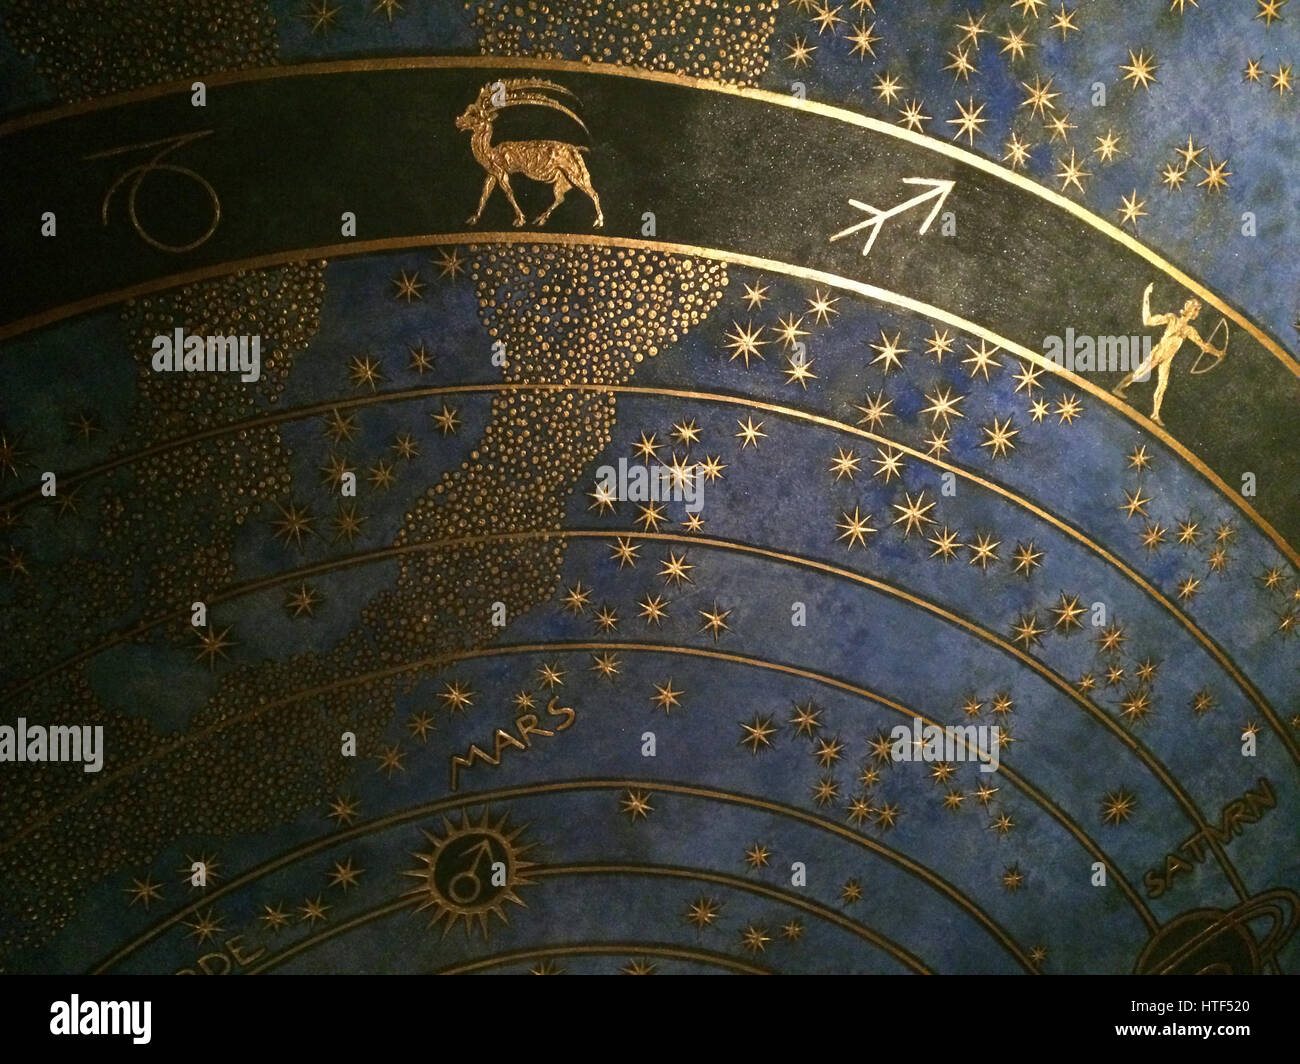 Zodiac ceiling in the Music Room in the Villa Stuck in Munich, Bavaria, Germany. Stock Photo